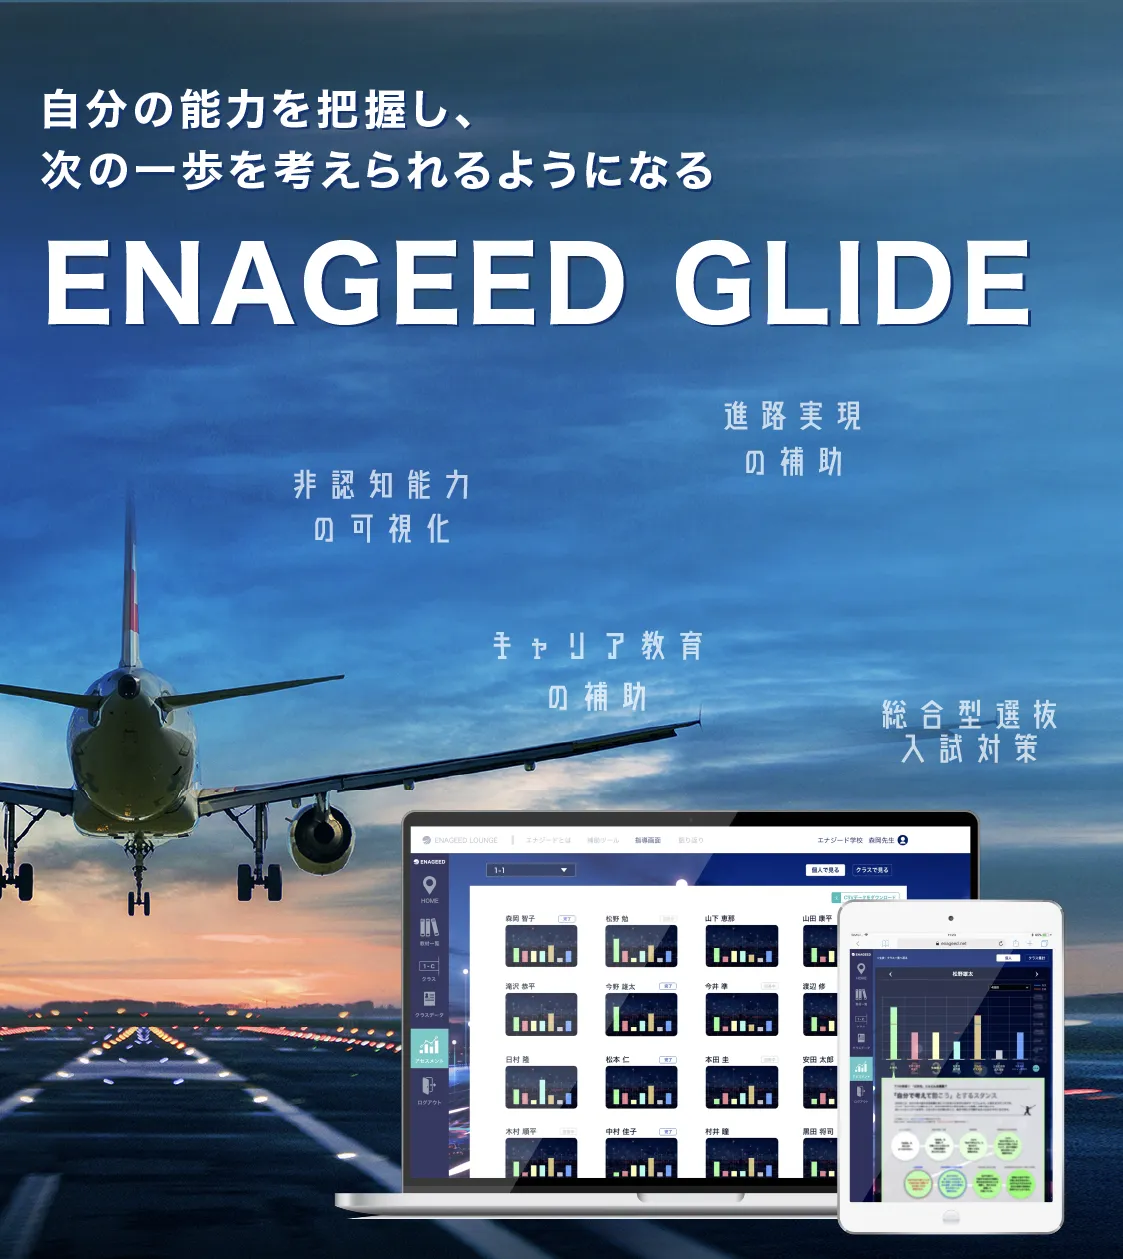 ENAGEED GLIDE